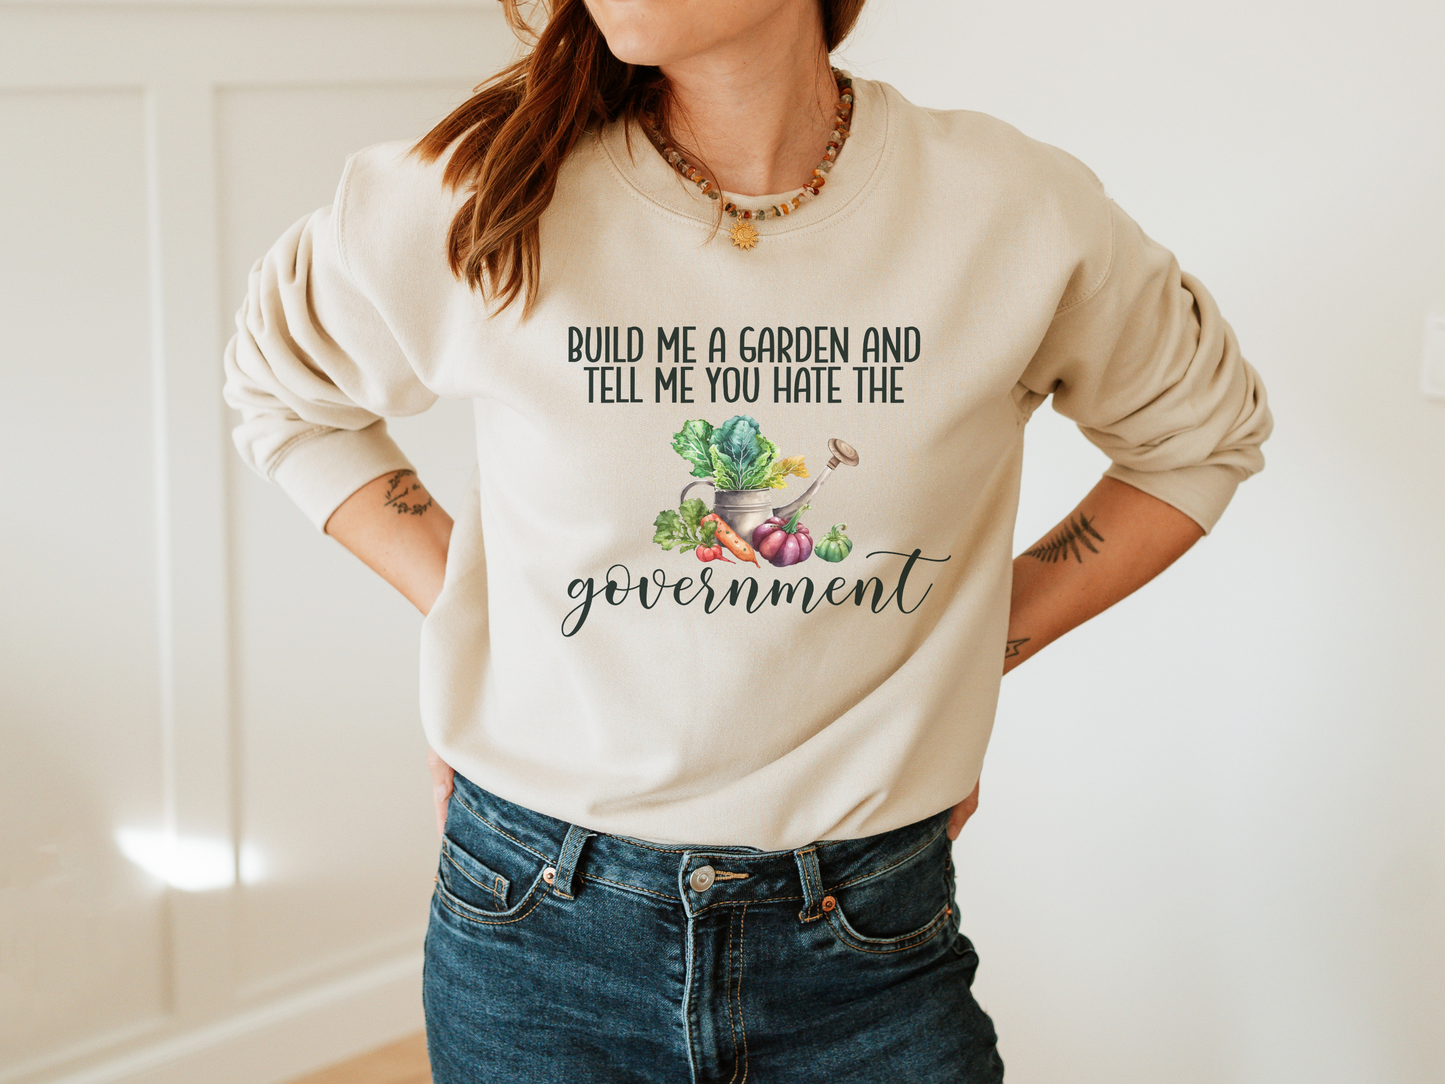 Build Me A Garden and Tell Me You Hate The Government Shirt